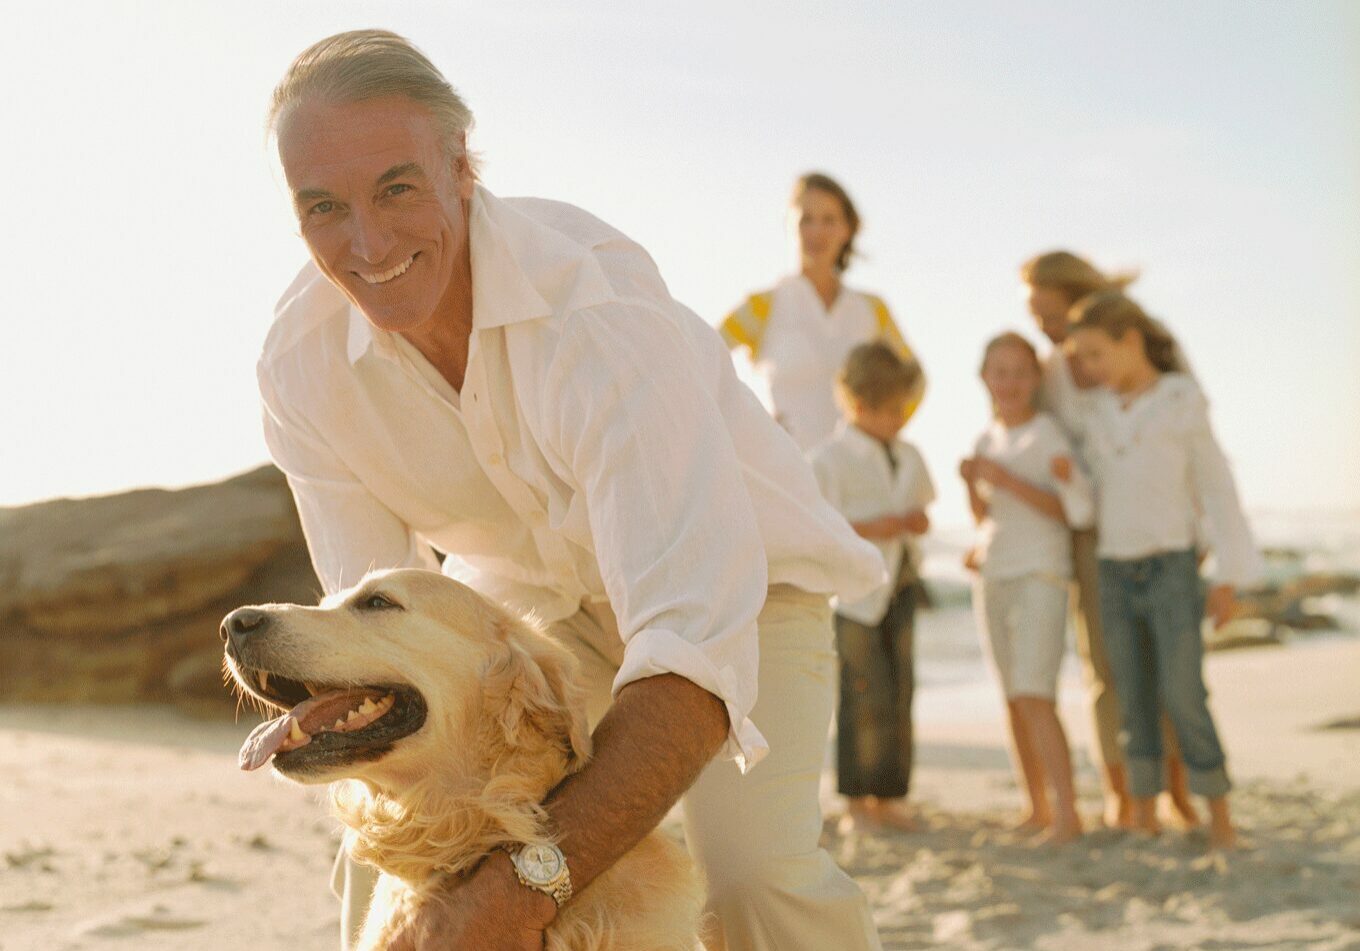 A man and his dog on the beach with people